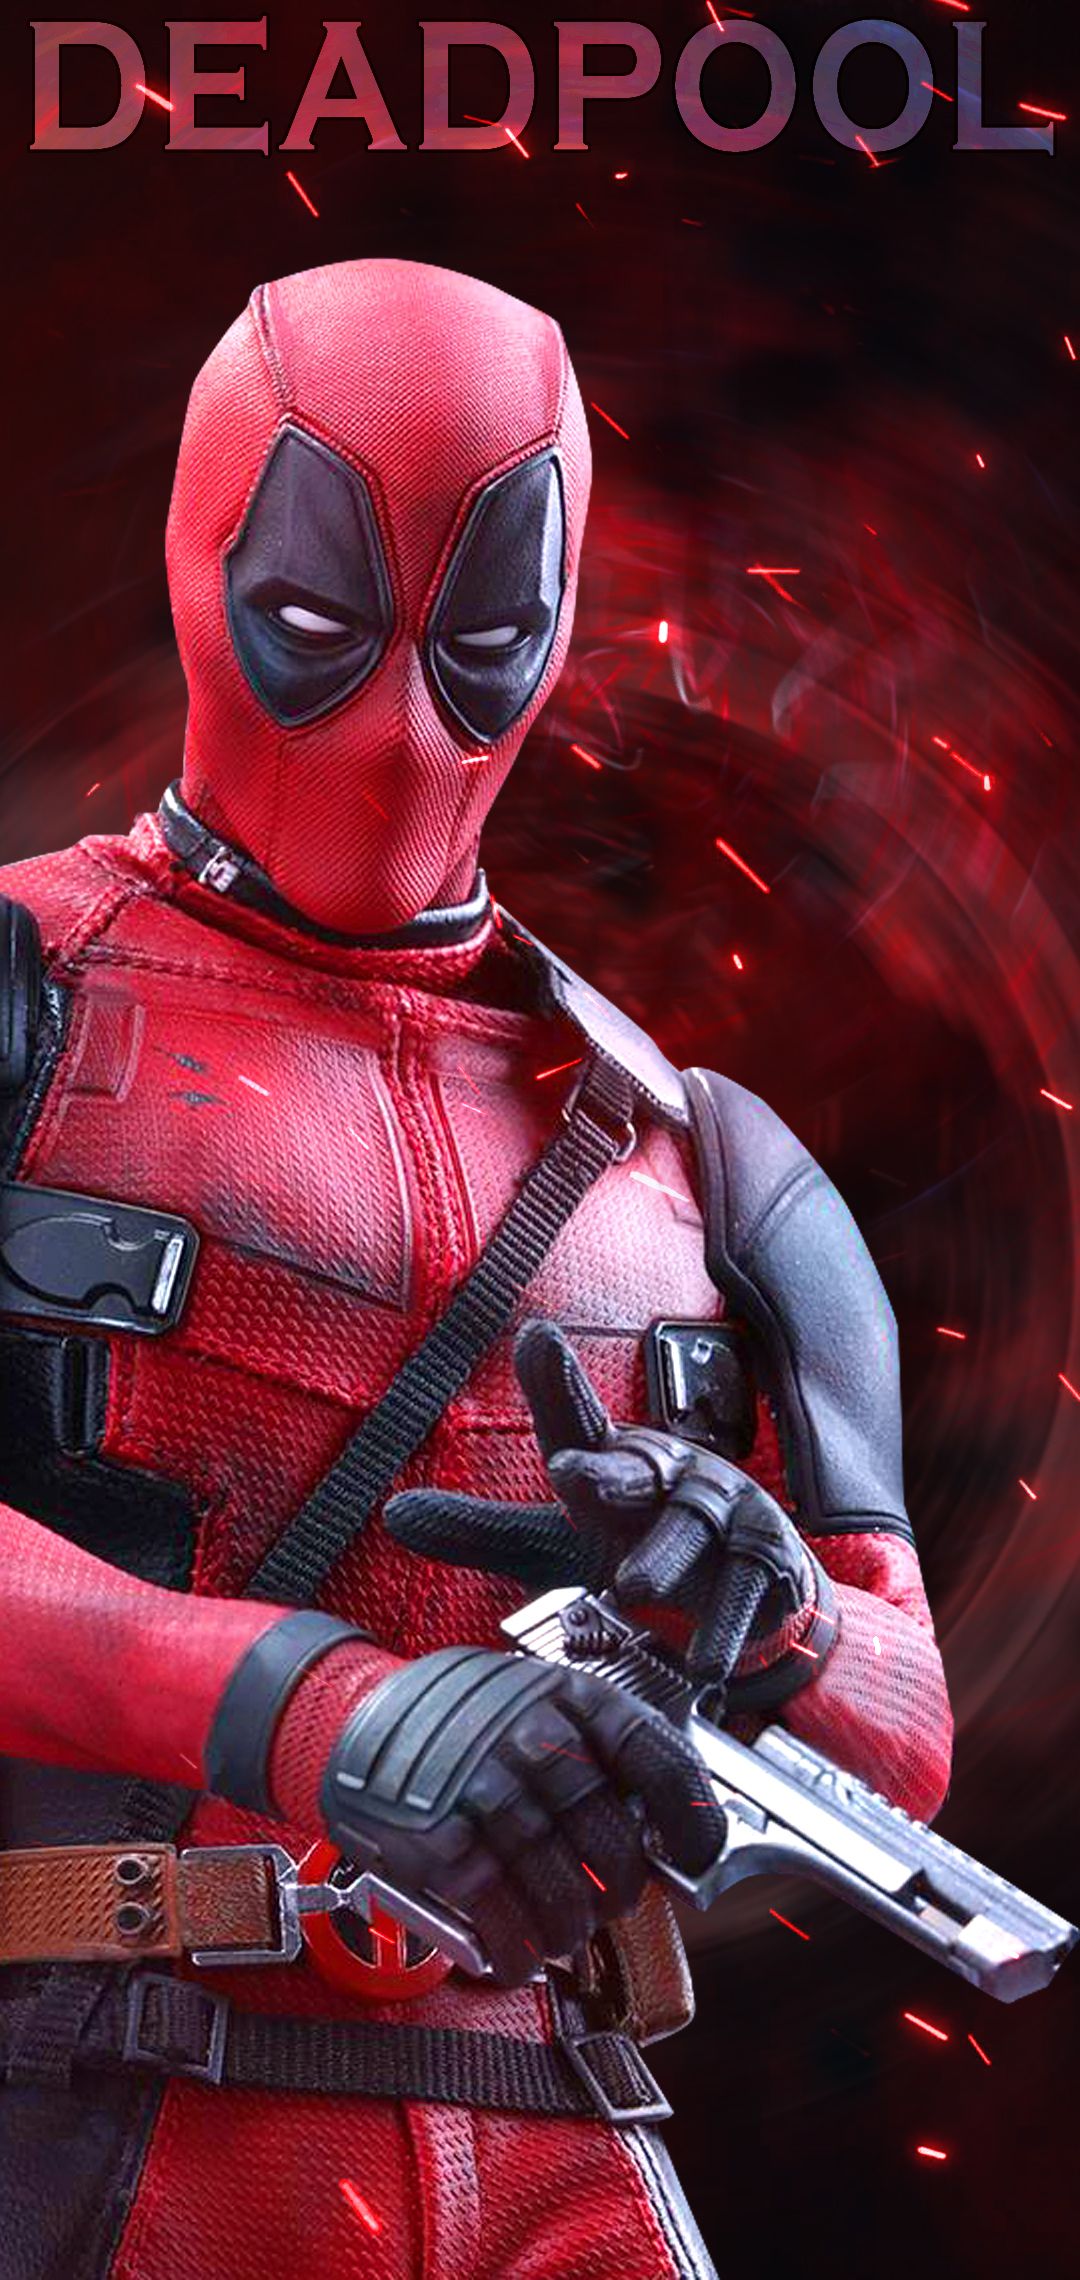  Deadpool Hintergrundbild 1080x2280. Free download Deadpool HD Wallpaper For iPhone And Android Android Wallpaper [1080x2280] for your Desktop, Mobile & Tablet. Explore Deadpool HD Wallpaper. Deadpool Background, Deadpool Wallpaper, Deadpool Wallpaper